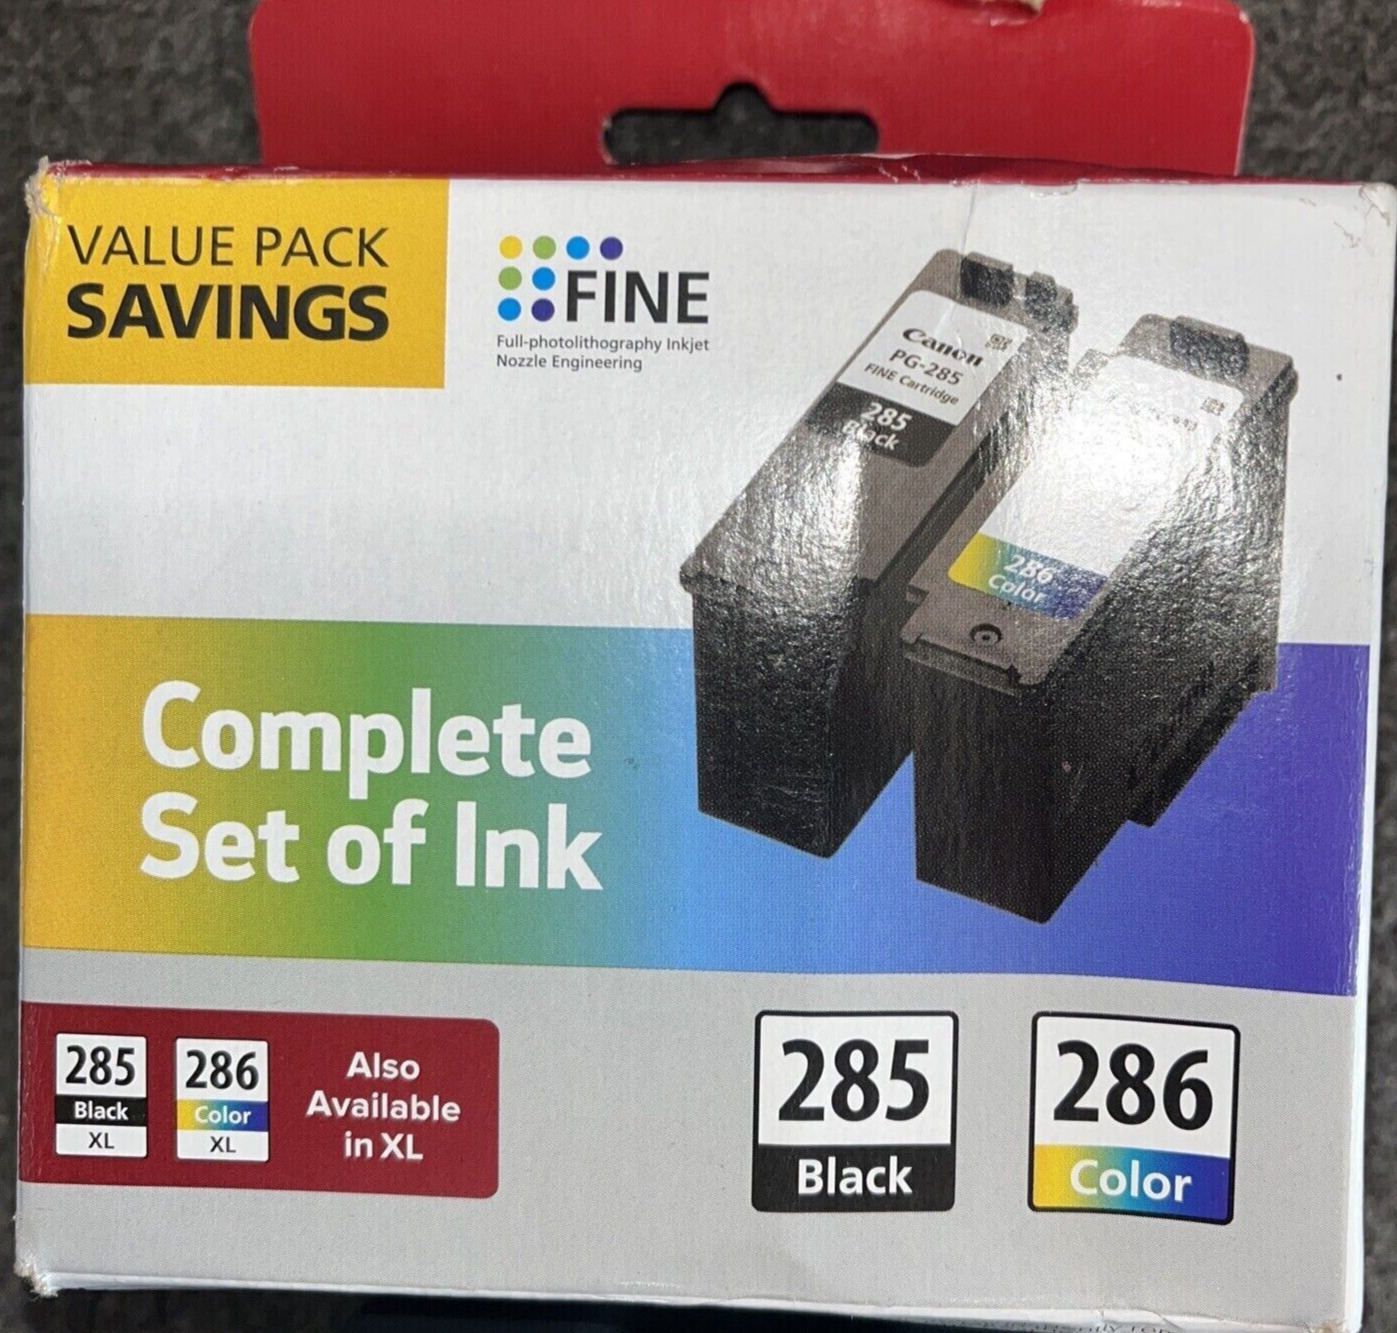 Genuine Canon PG-285/CL-286 Ink Cartridges Combo for Canon 7720 7820 Printer-NEW